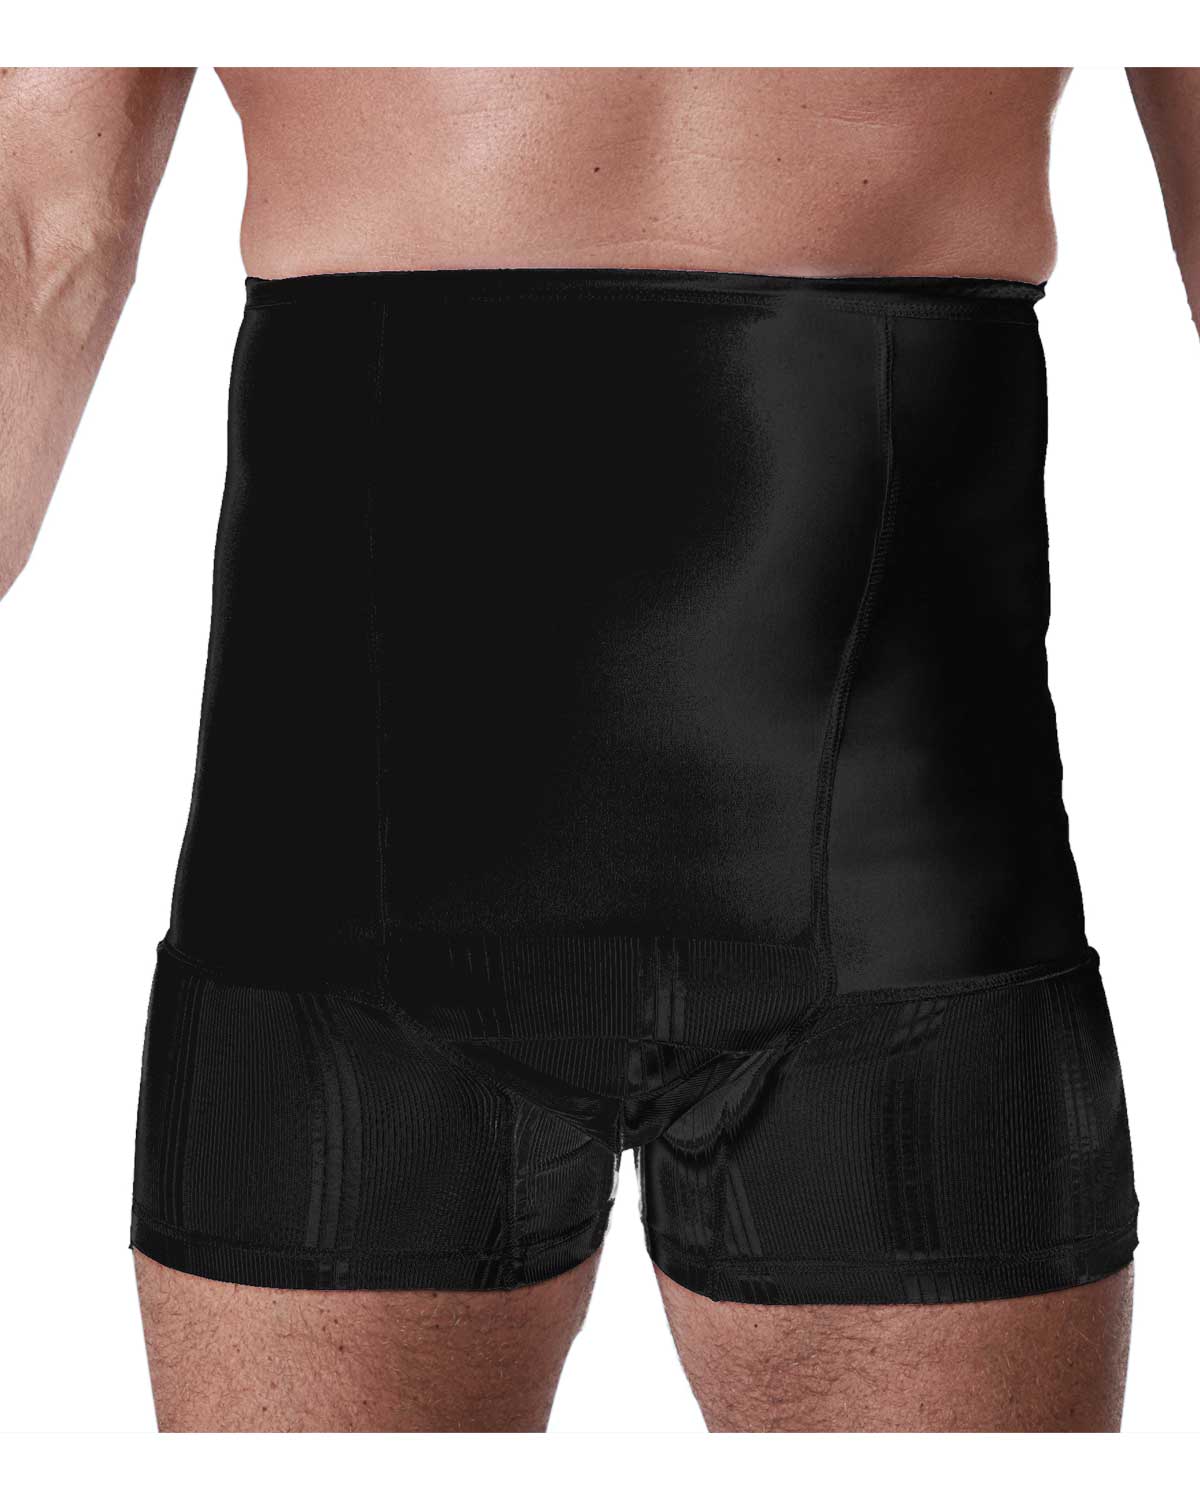 CUI Mens Hernia Low Waist Support Girdle With Legs - 1 each, LARGE, BLACK